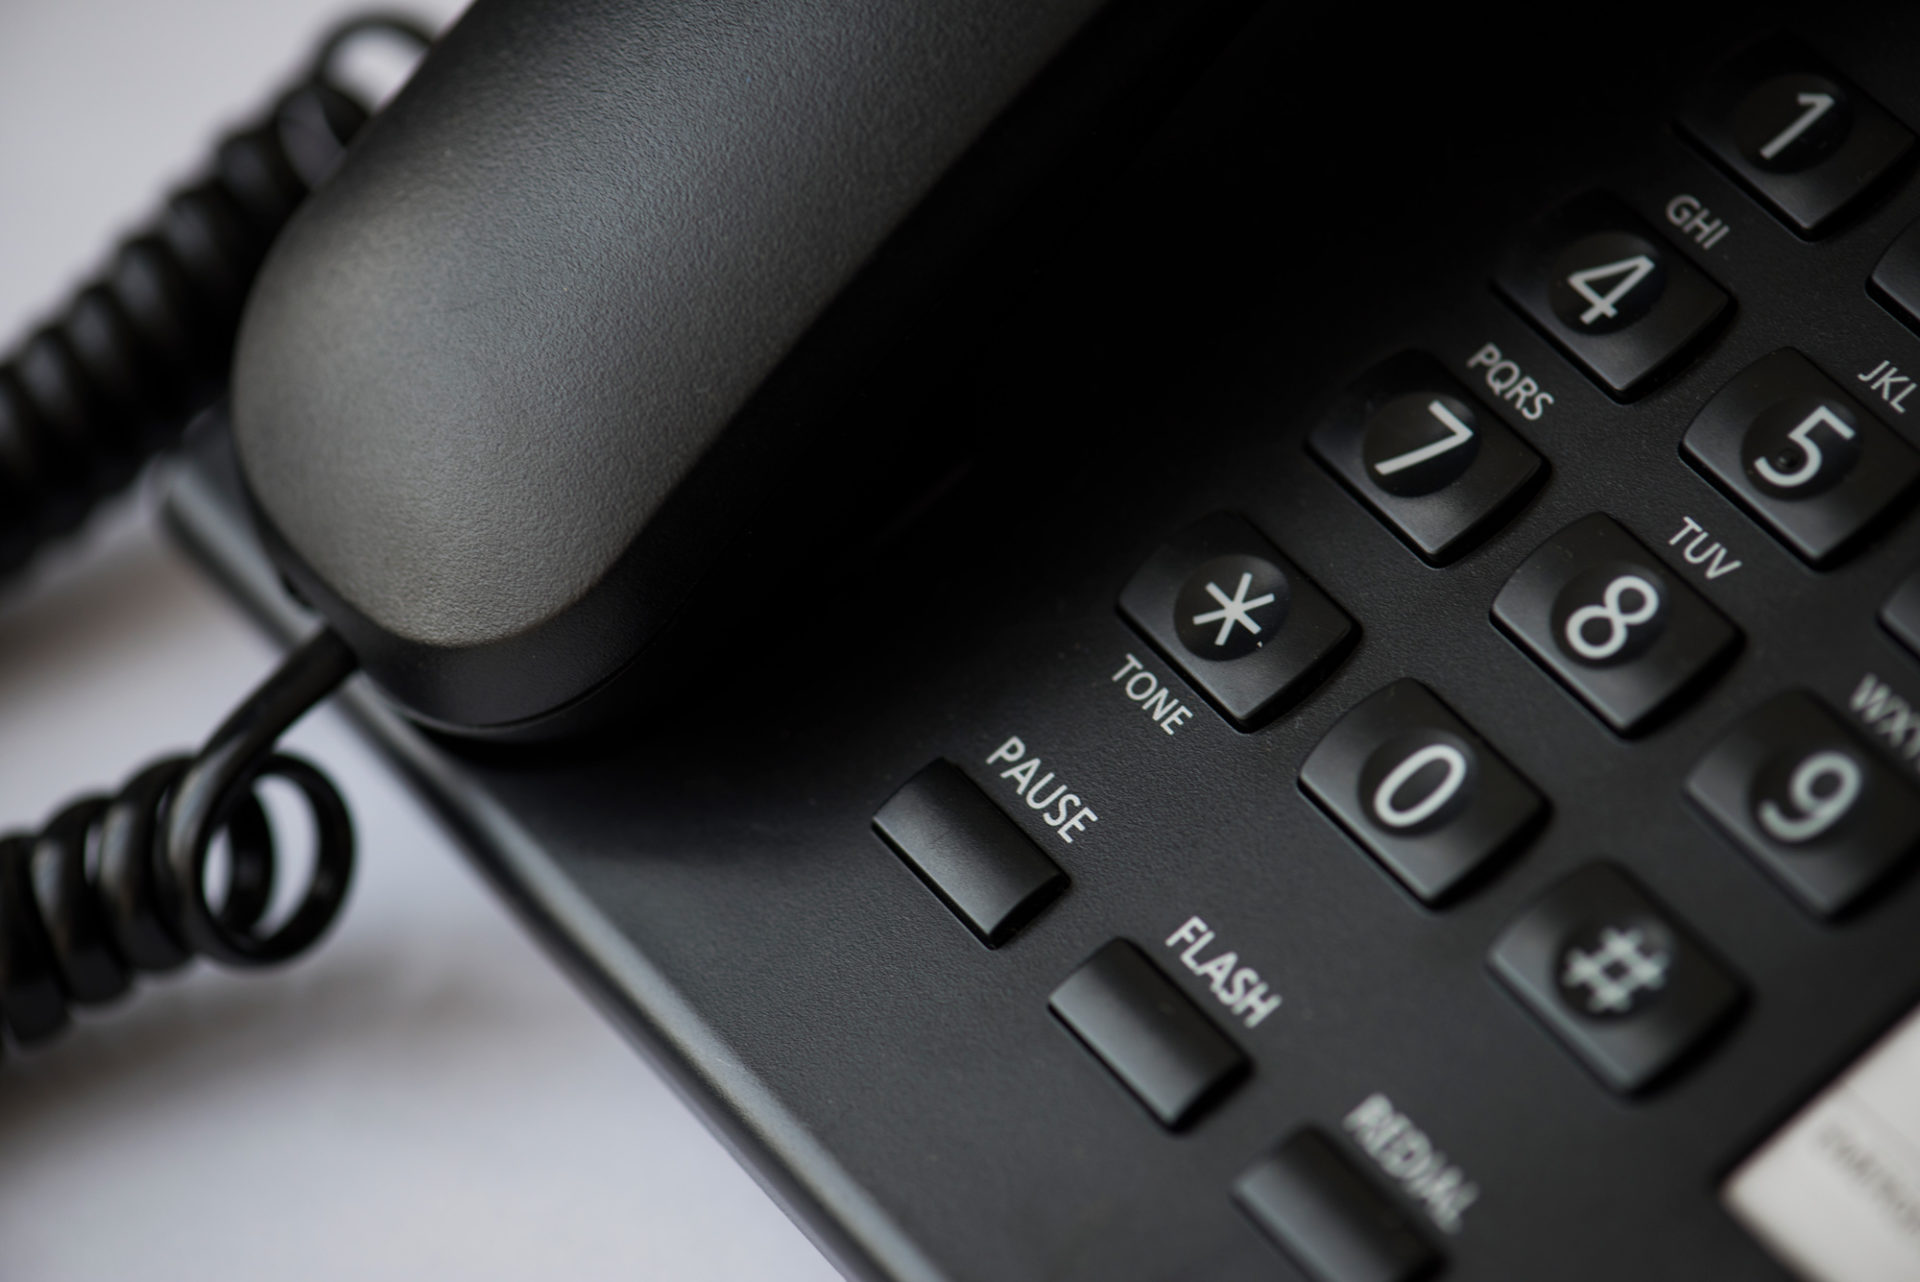 VoIP-phone-system